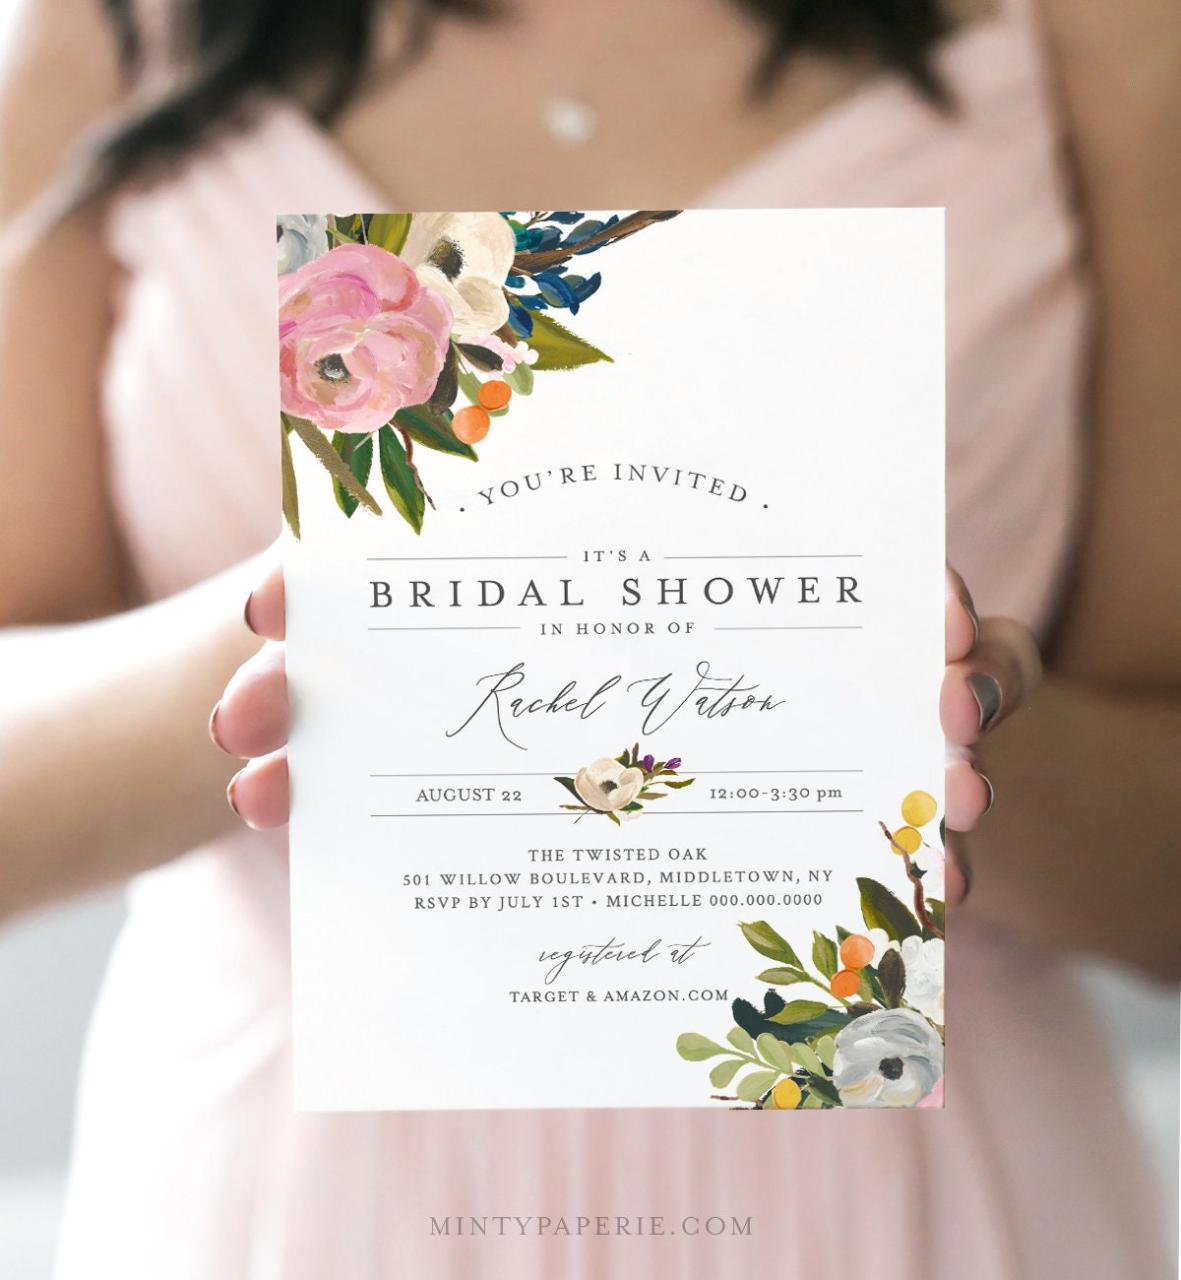 Floral Bridal Shower Invitation, INSTANT DOWNLOAD, Self-Editing Template, Printable Wedding